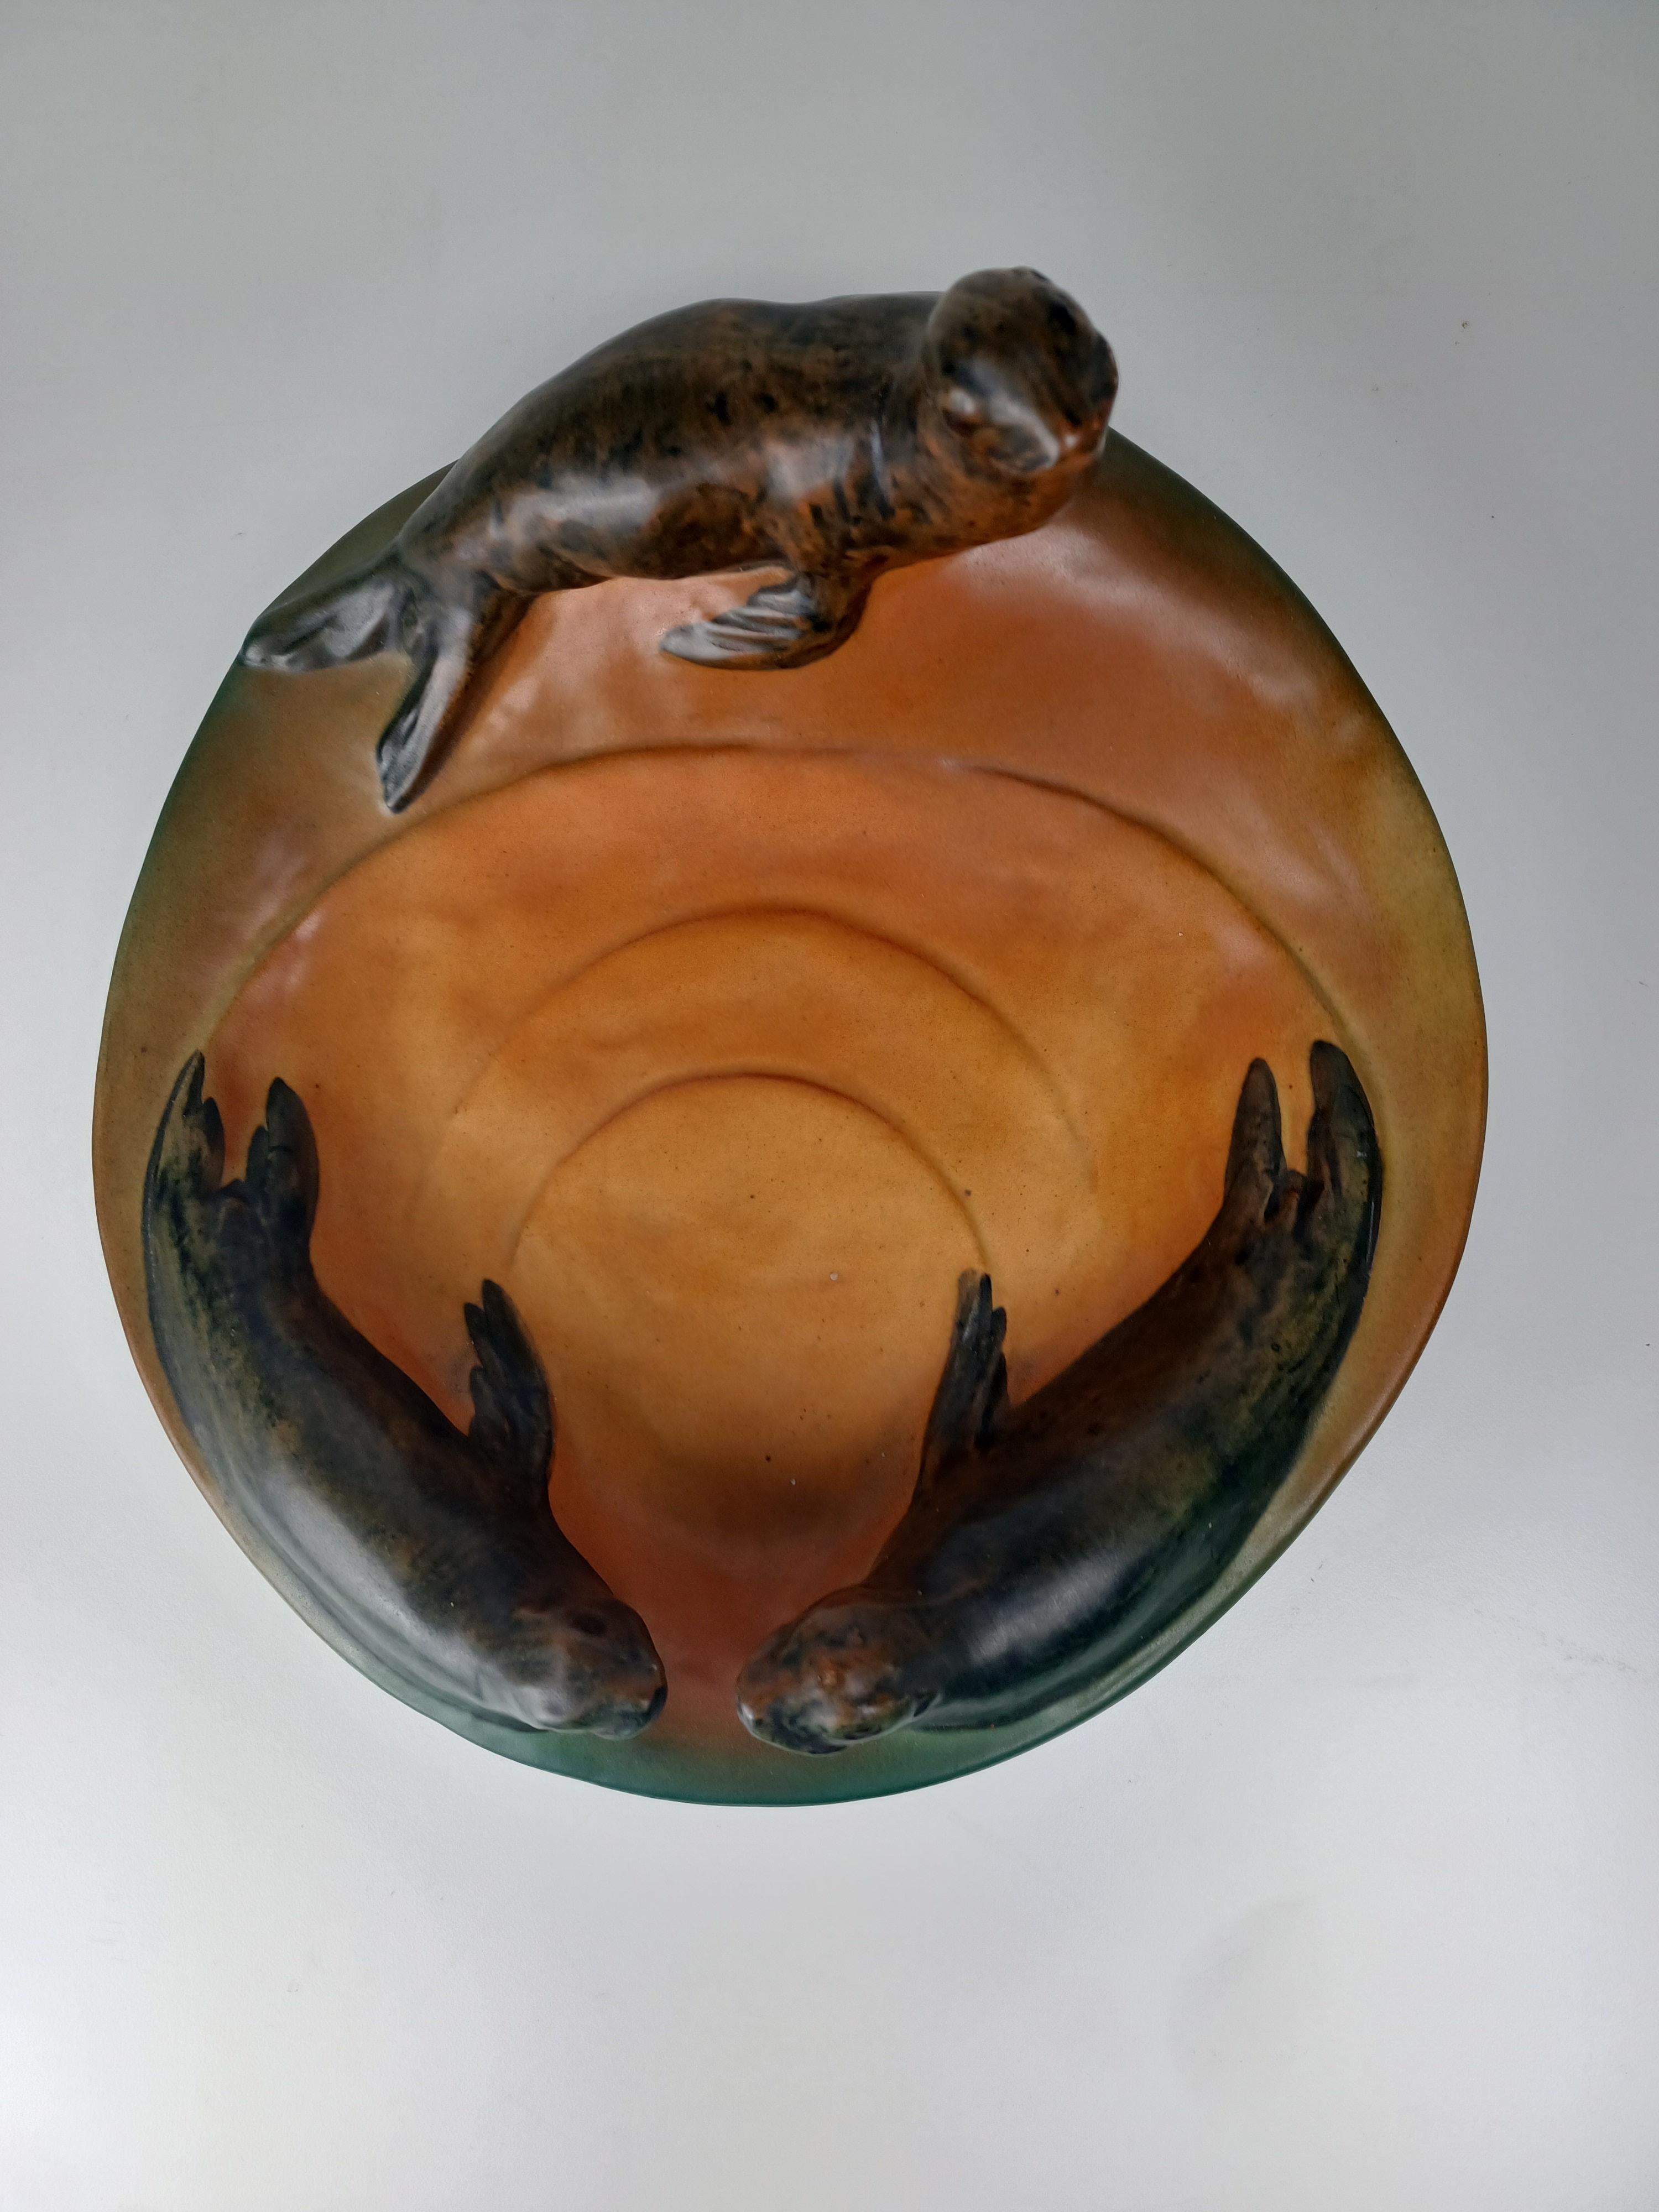 1910's Danish art nouveau handcrafted sealion bowl - ash tray by P. Ipsens Enke

The handcrafted art nuveau bowl featureing sealions designed in 1915 by Miss Nesnée is in very good condition condition.

Ipsens Enke (1843 - 1955) was a very